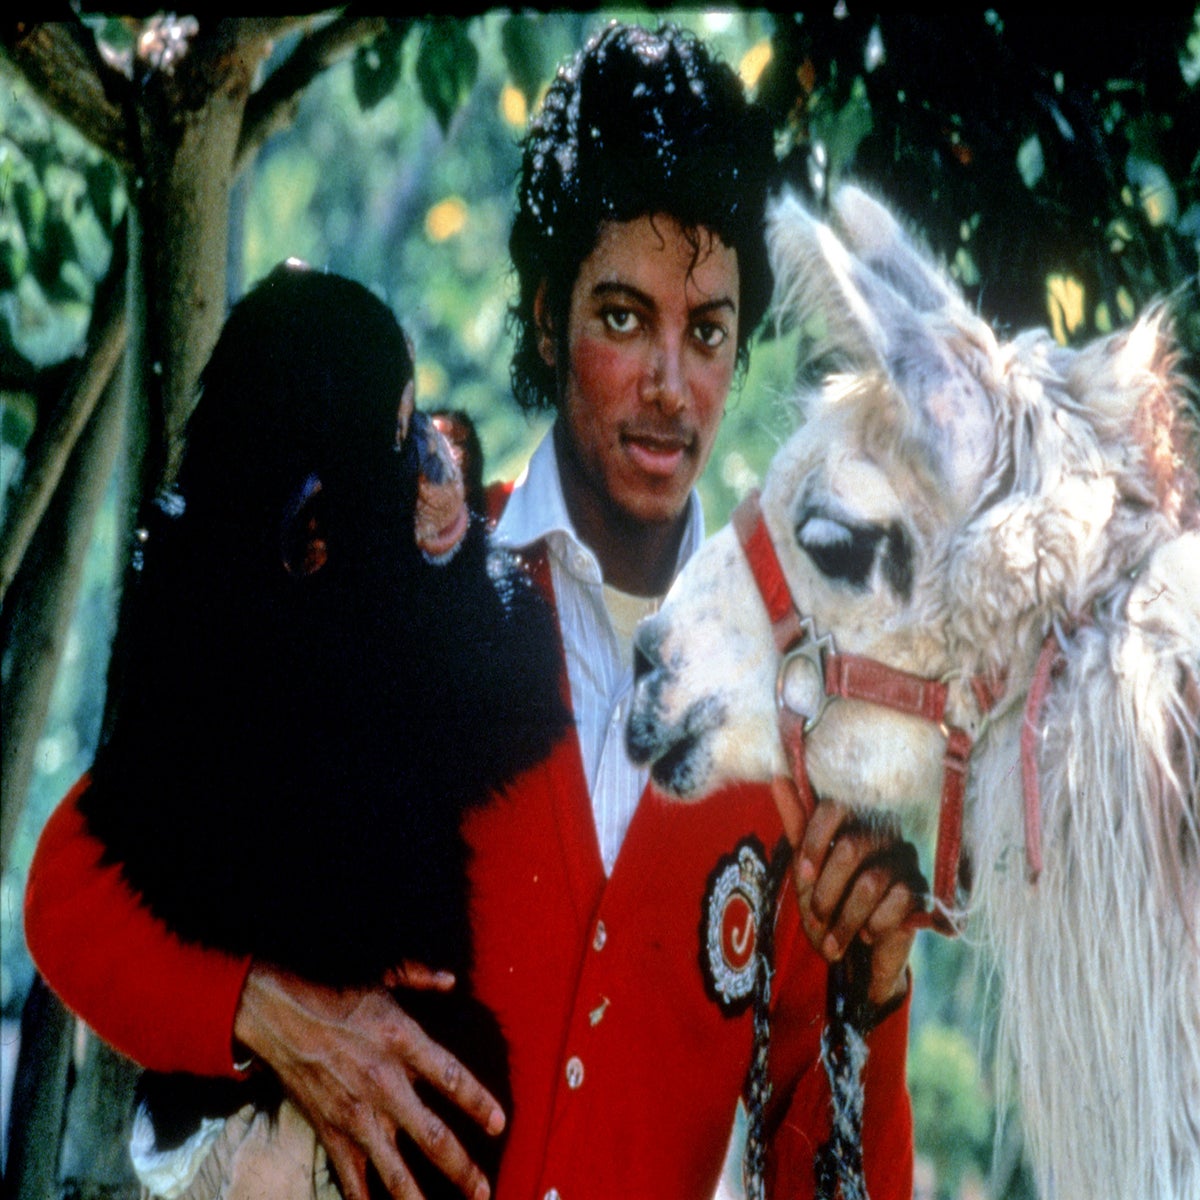 Michael Jackson: Whatever happened to singer's pet chimpanzee Bubbles? |  The Independent